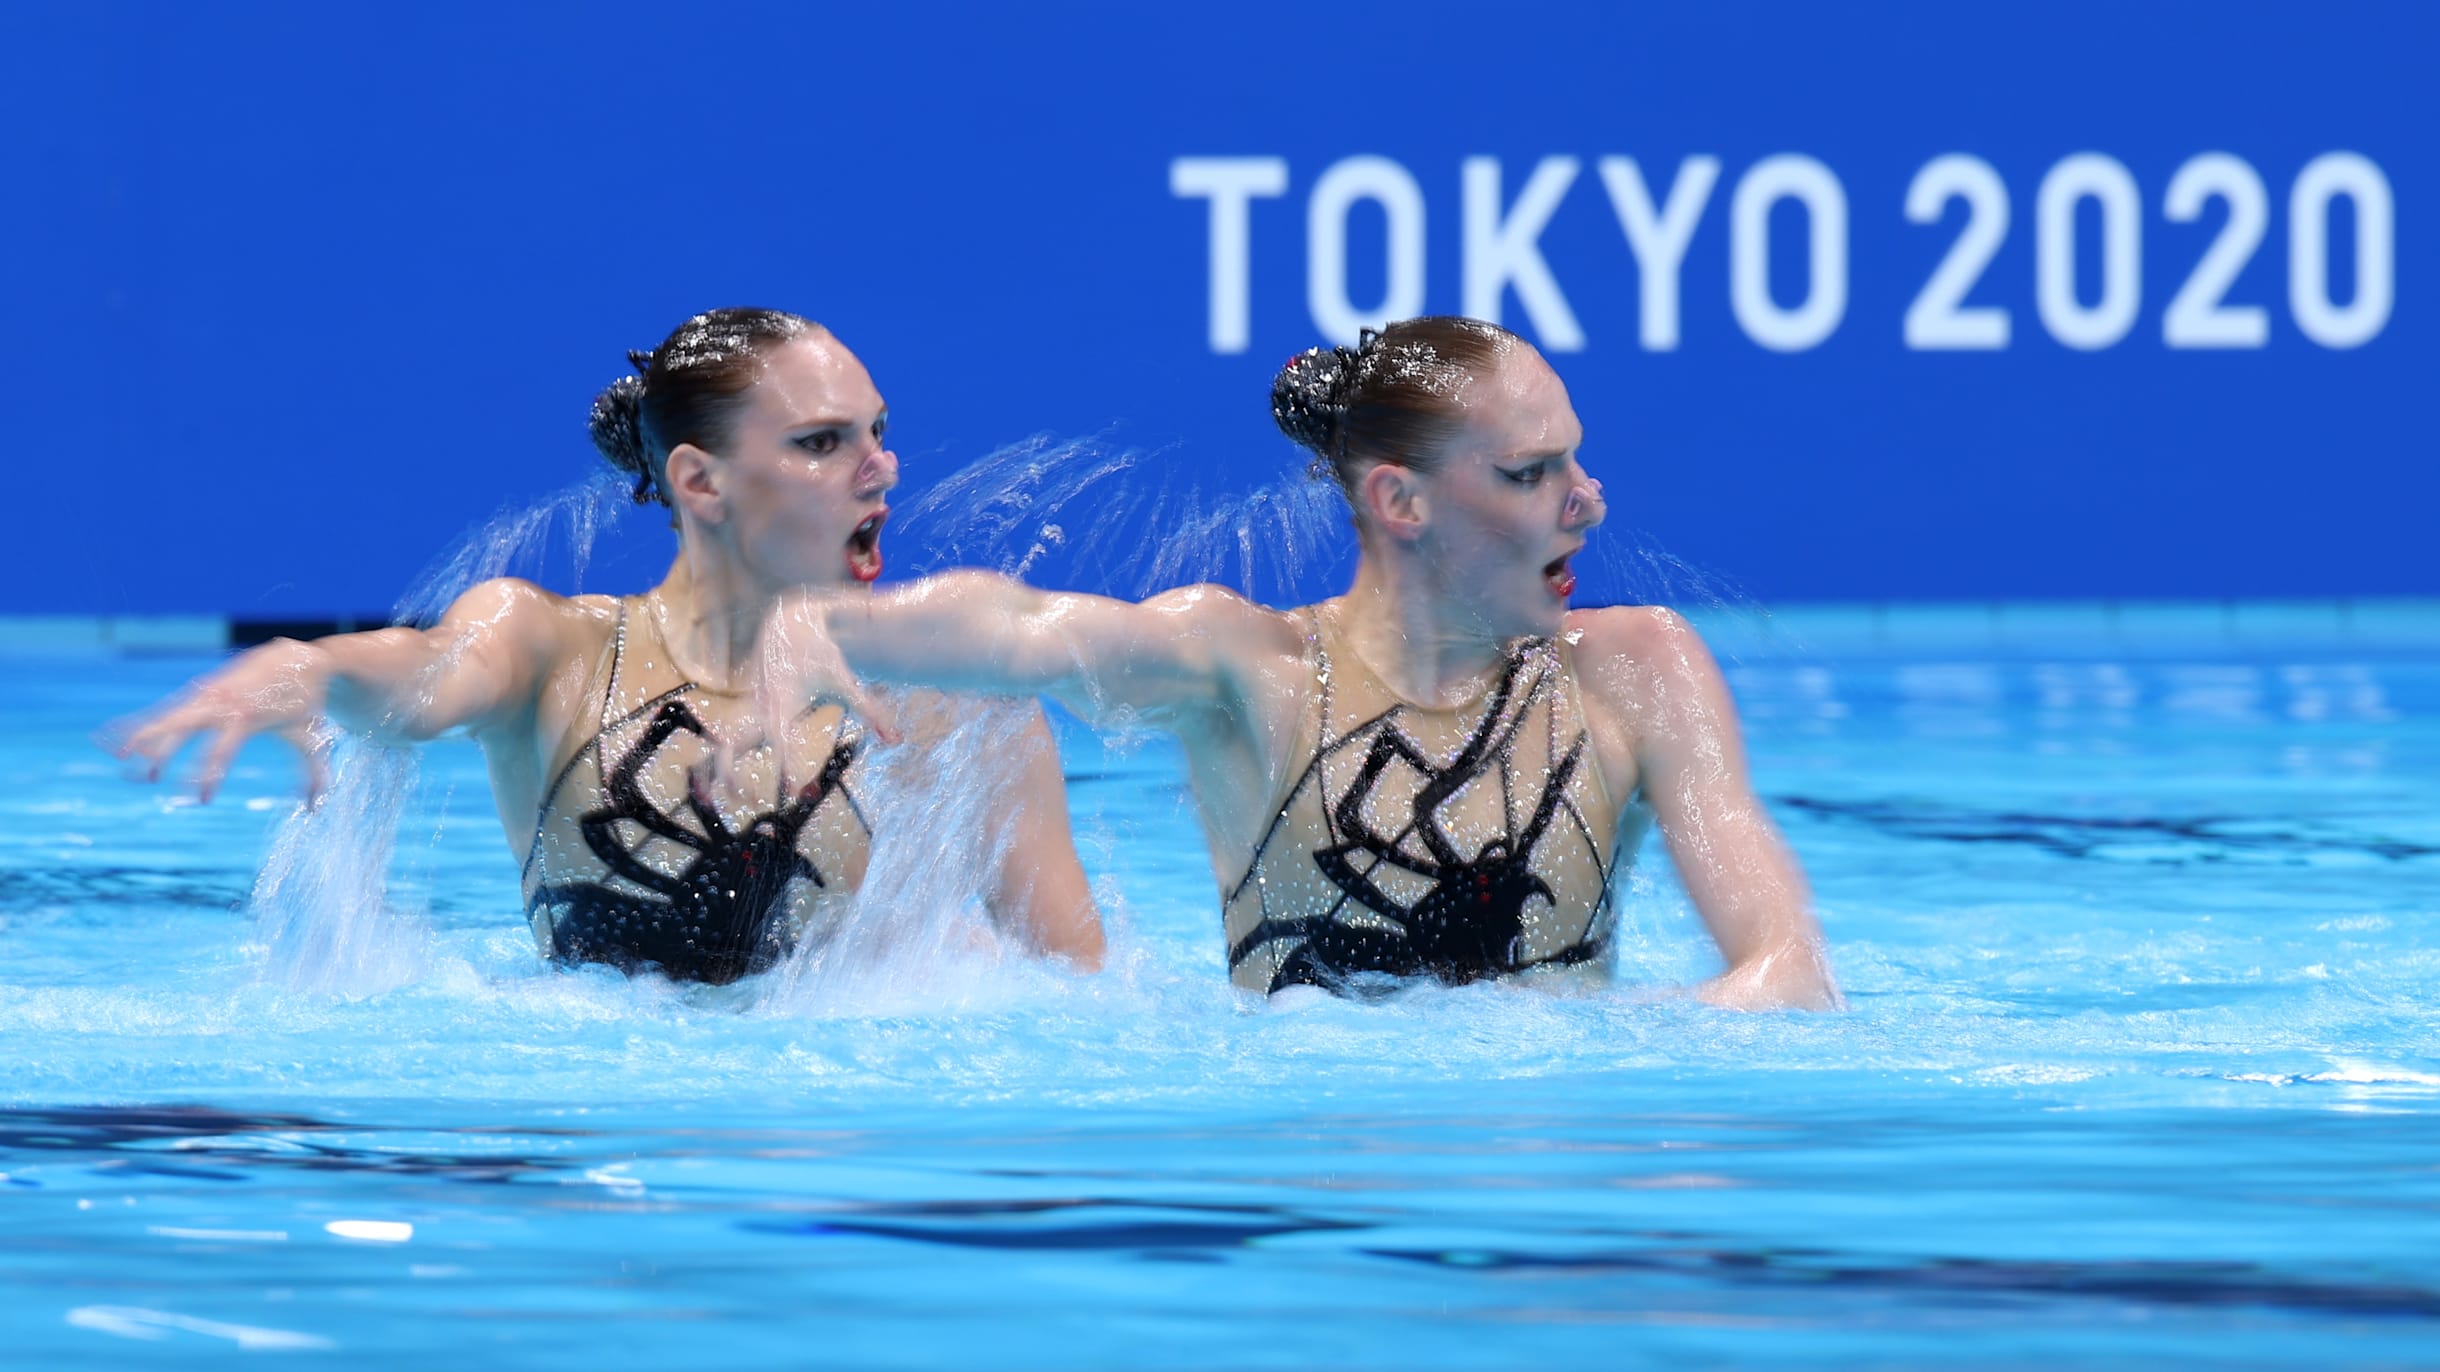 Artistic swimming at the Tokyo 2020 Olympic Games highlights to watch